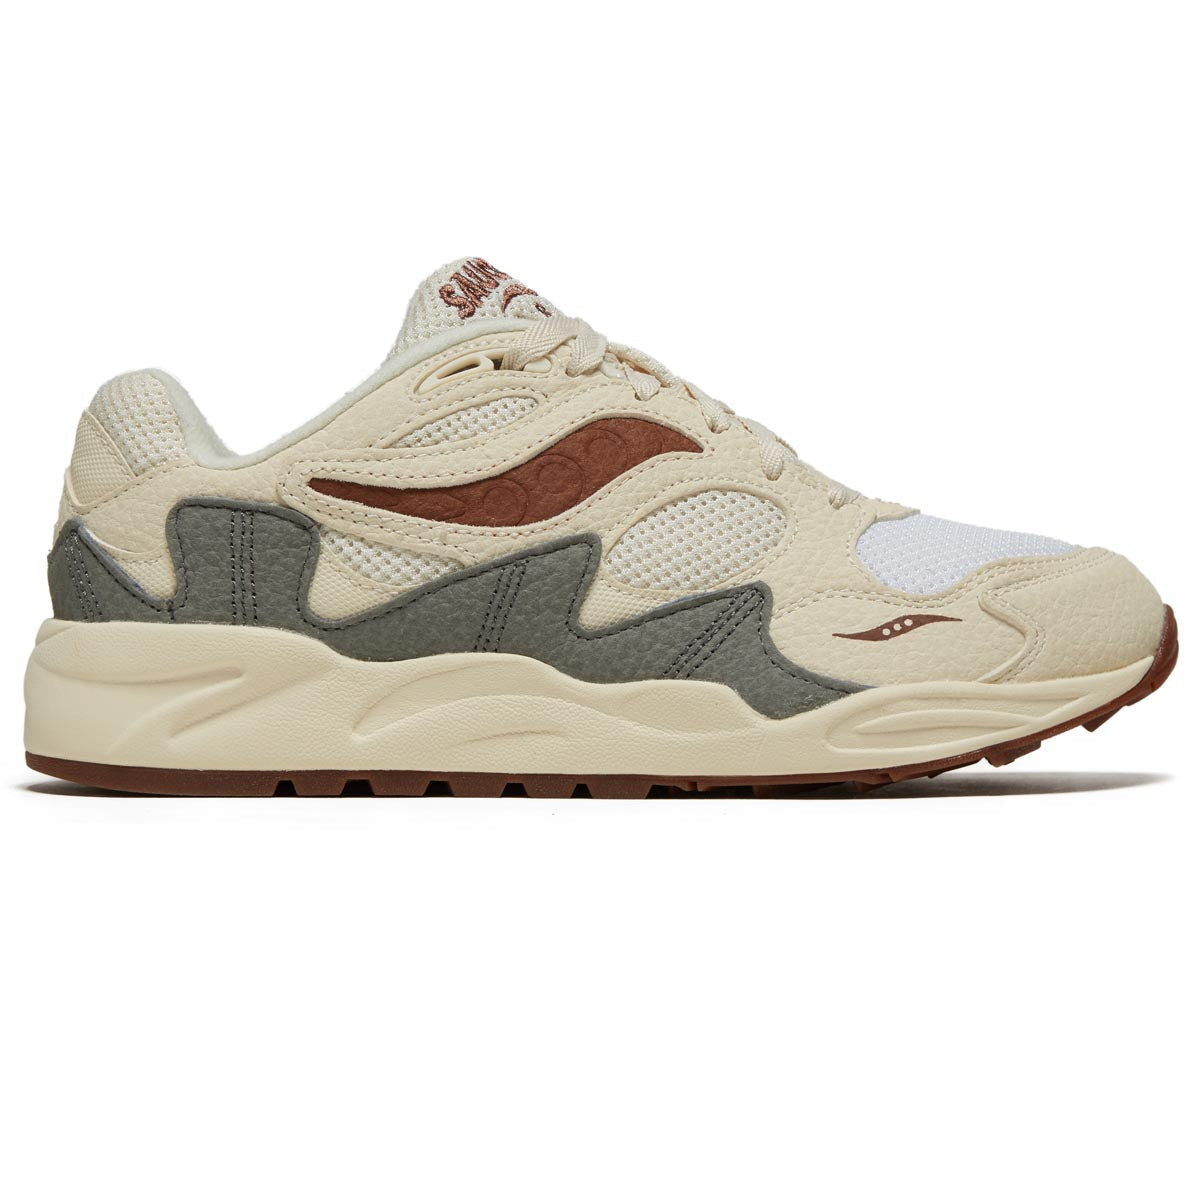 Saucony Grid Shadow 2 Shoes - Sand/Brown image 1